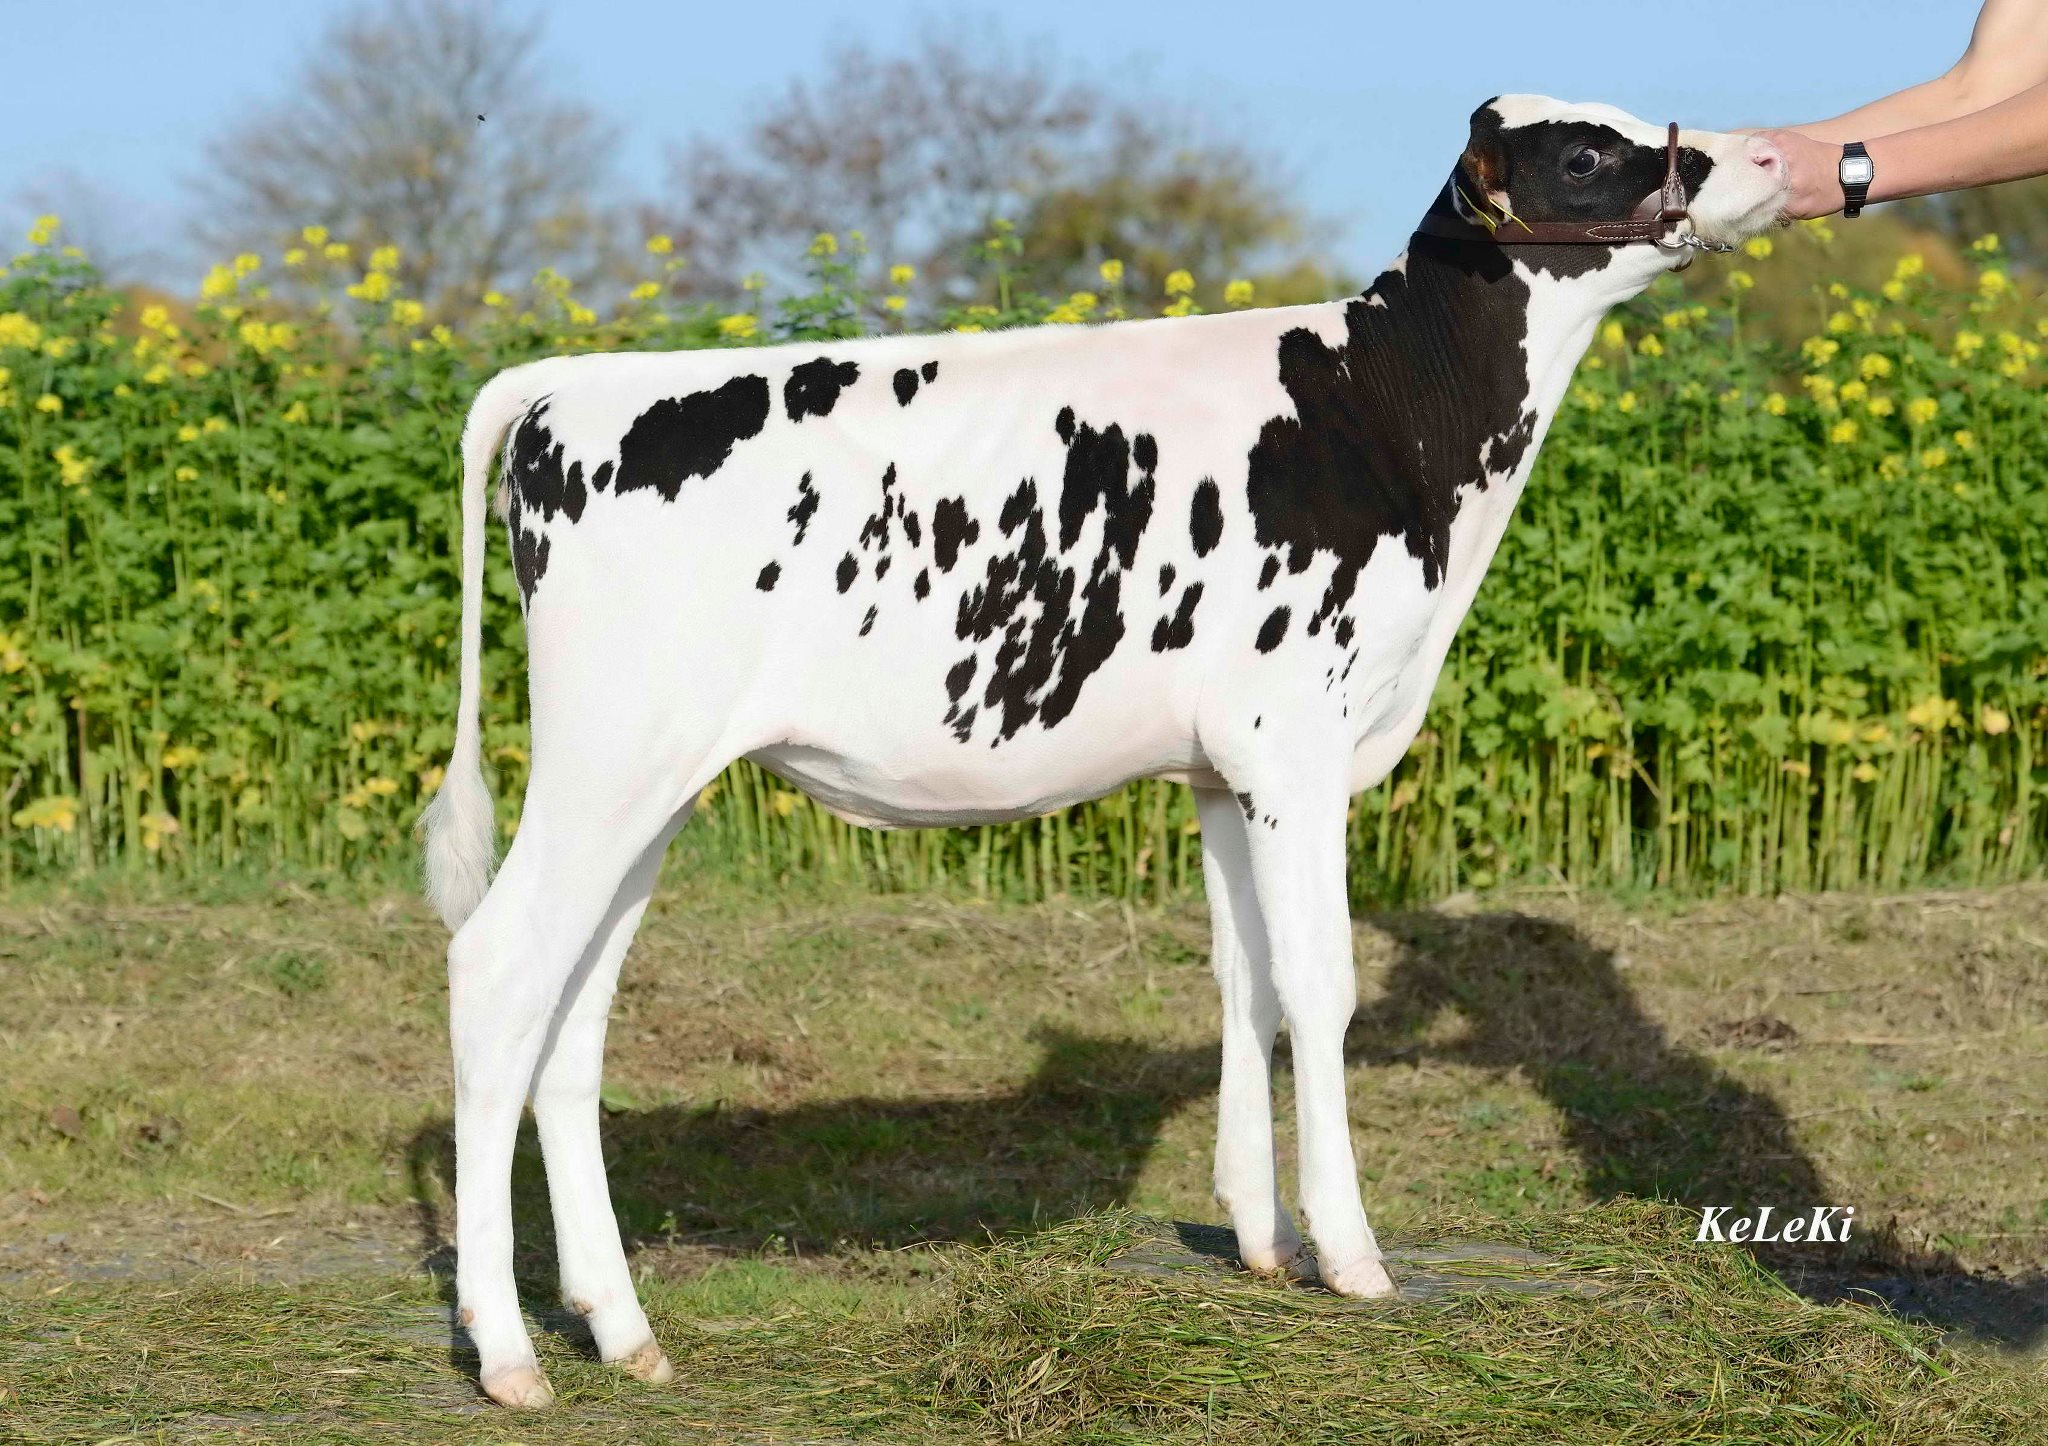 WESSELCREST CAMERON ANGEL topped the Tulip Holstein Sale in Zwolle